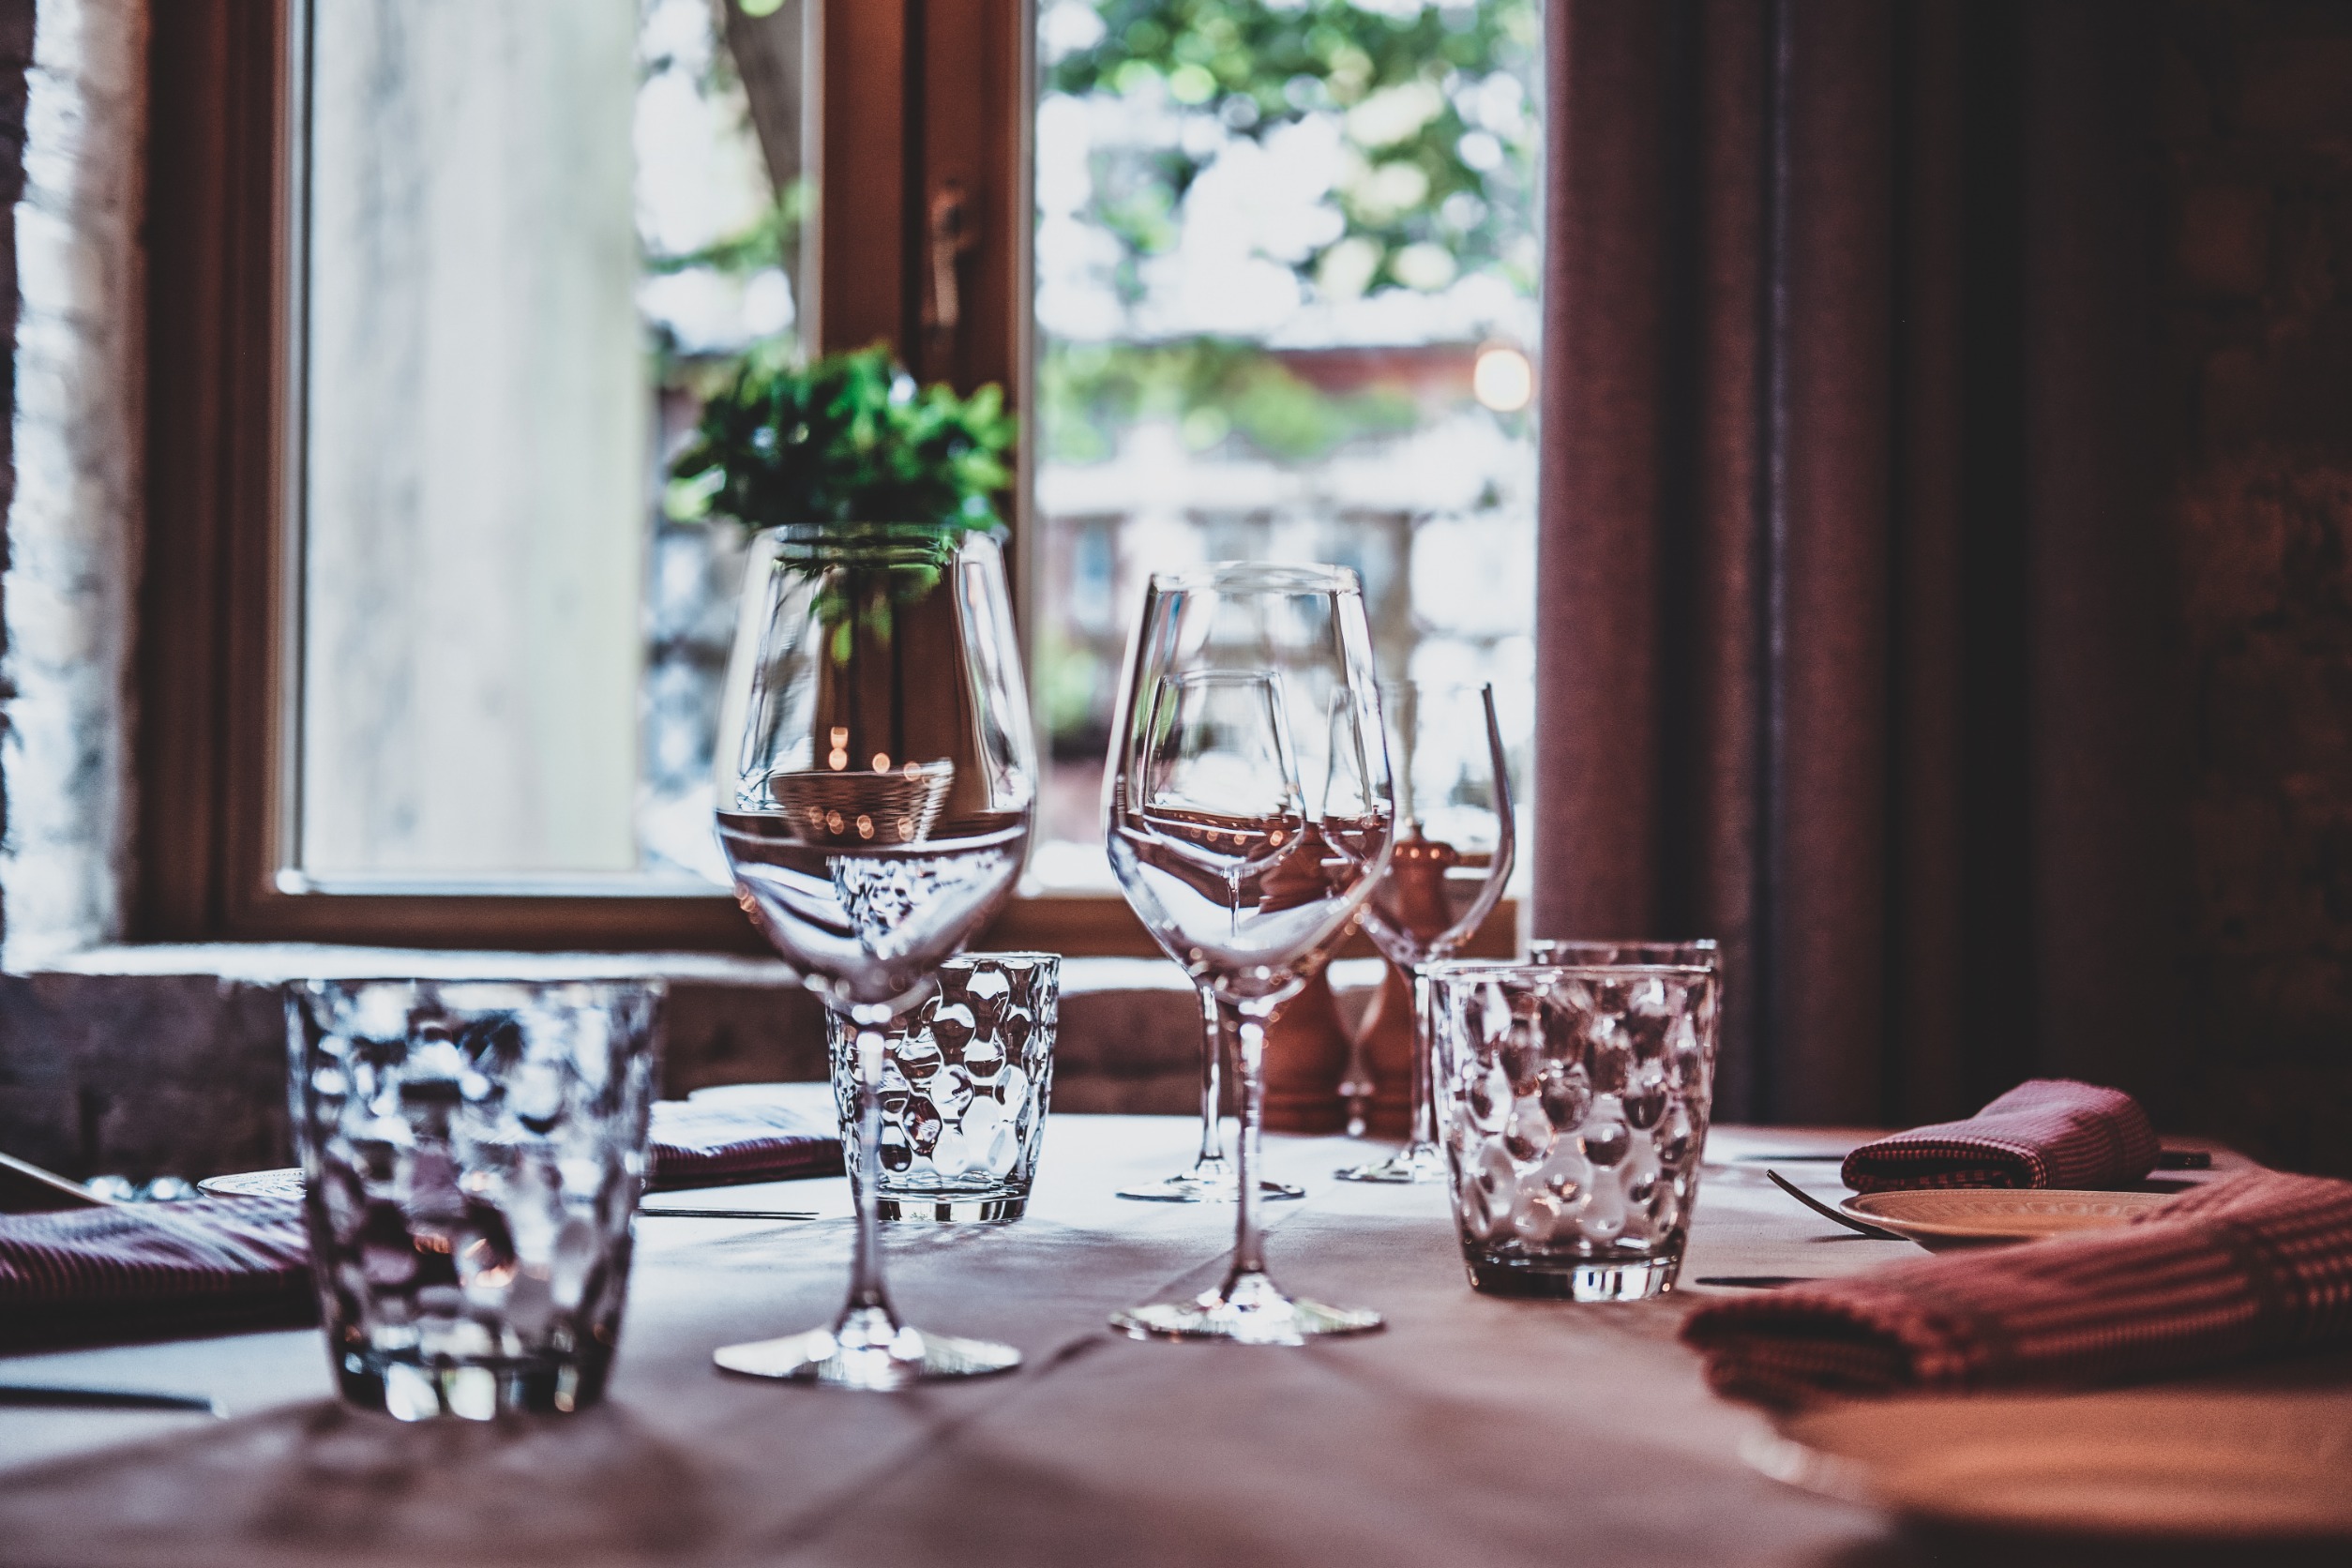 "Are the tipping norms different here?" Tipping customs can vary widely depending on the location, whether it’s a different country or a specific type of establishment. Being aware of local norms can help you tip appropriately and respectfully. :: 123rf